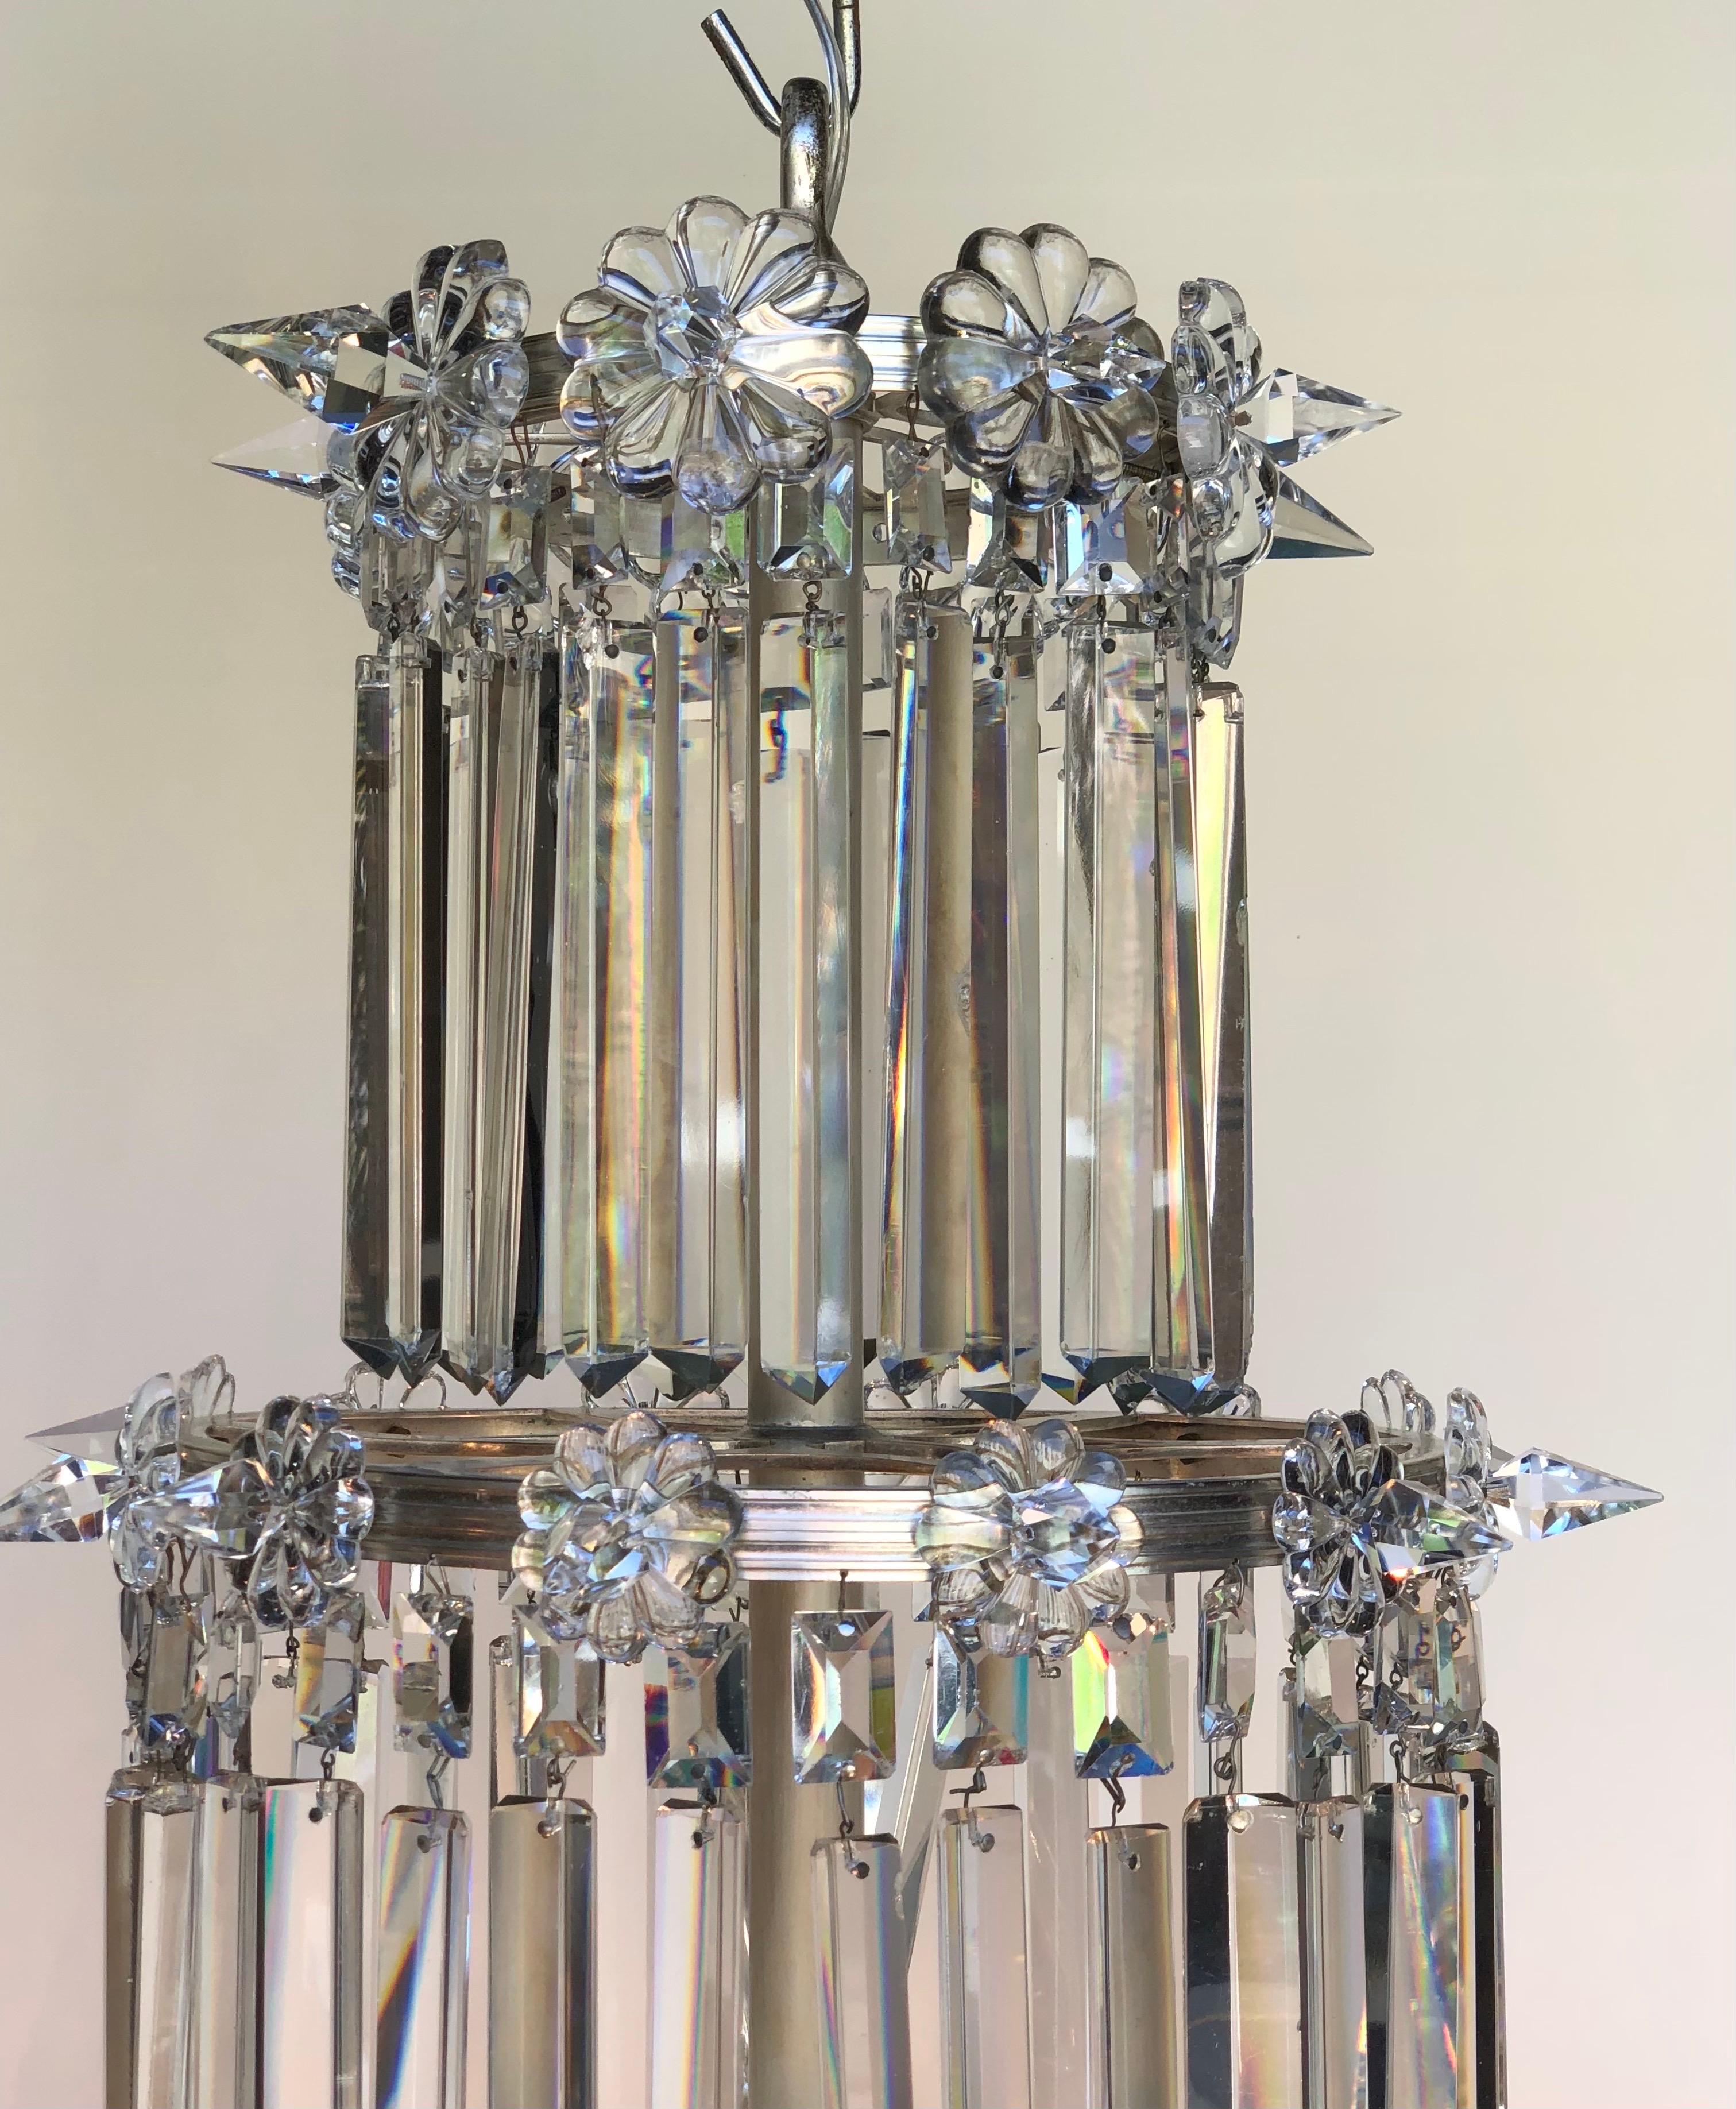 Plated 19th C. English Regency Waterfall Silver Plate & Crystal Chandelier / Gasolier For Sale